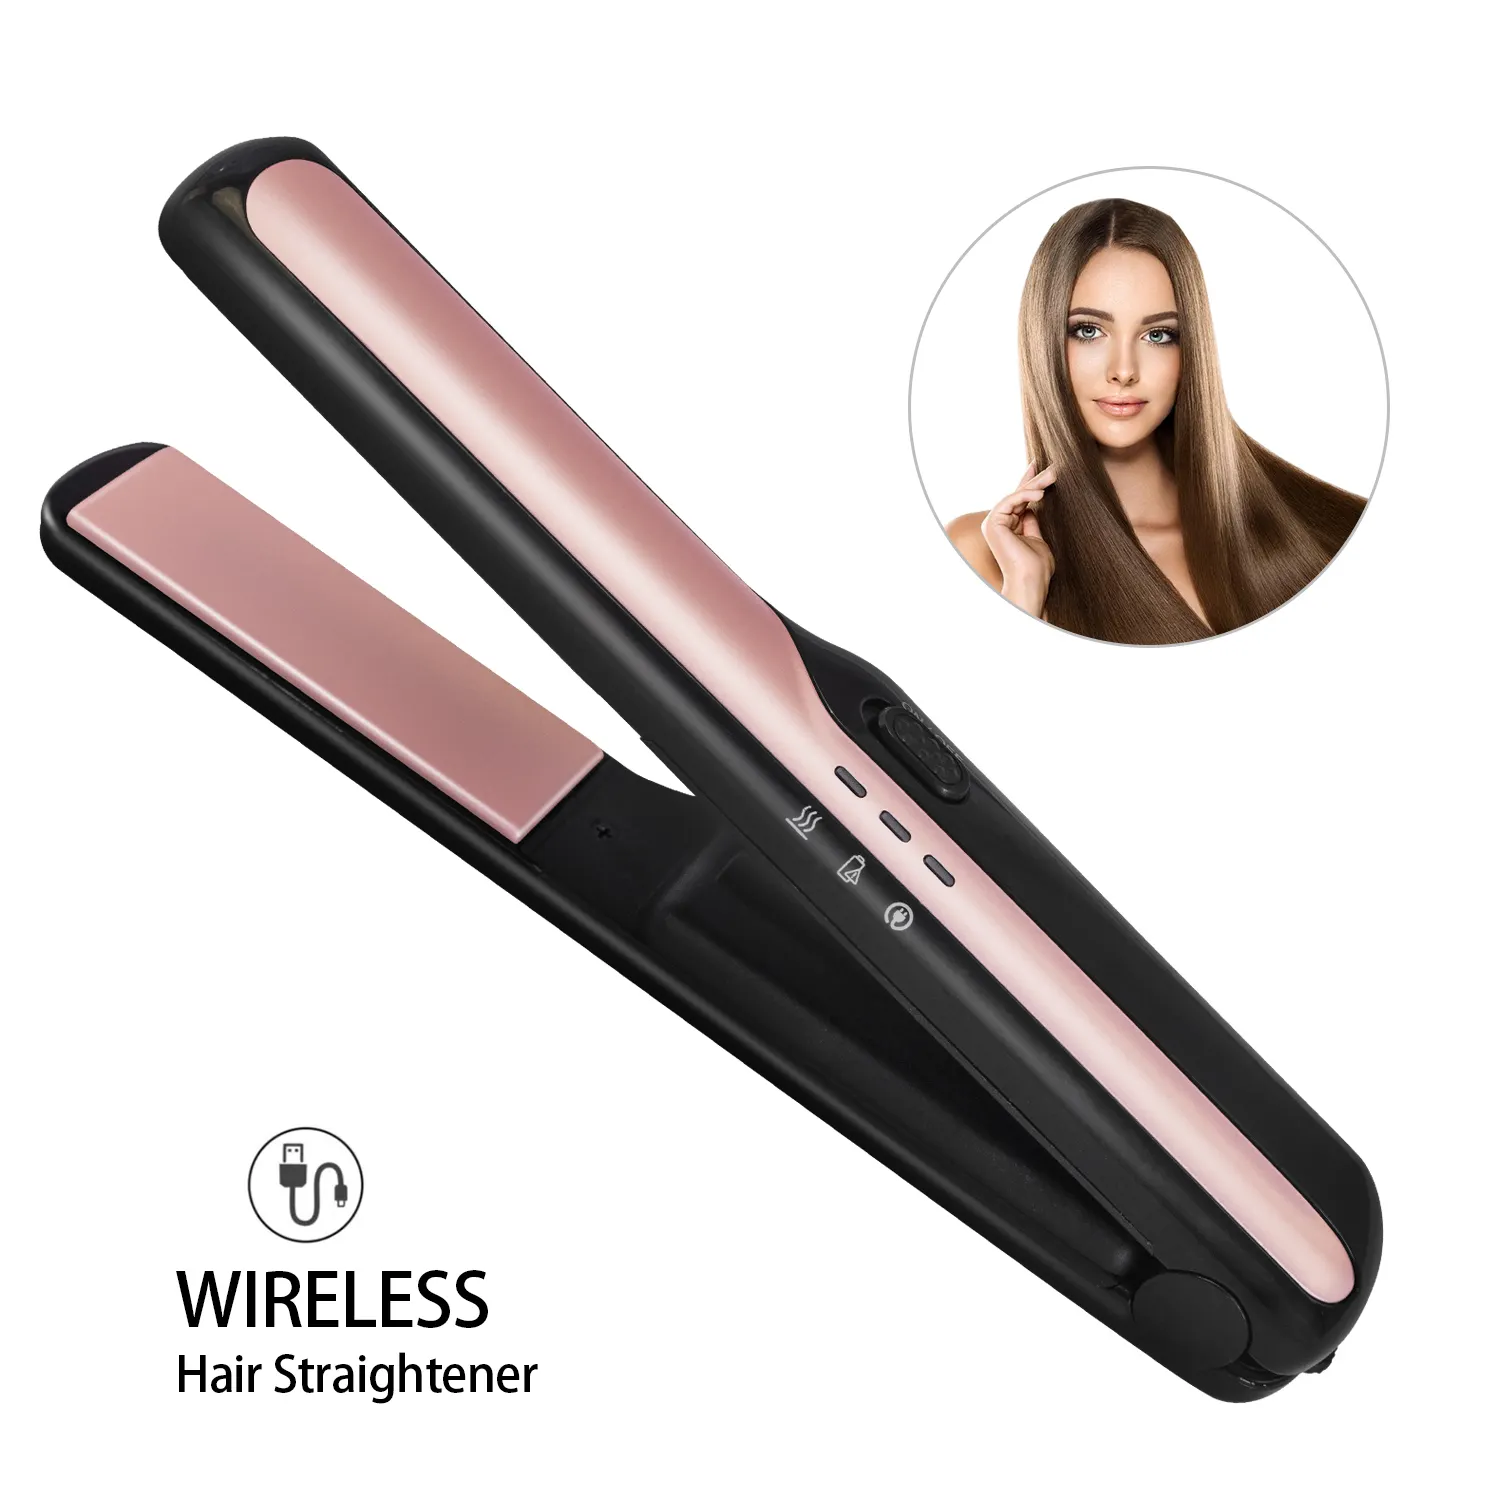 2 in 1 with Digital LCD Display Mini USB Rechargeable Flat Iron Hair Straightener wireless Straightener and curler